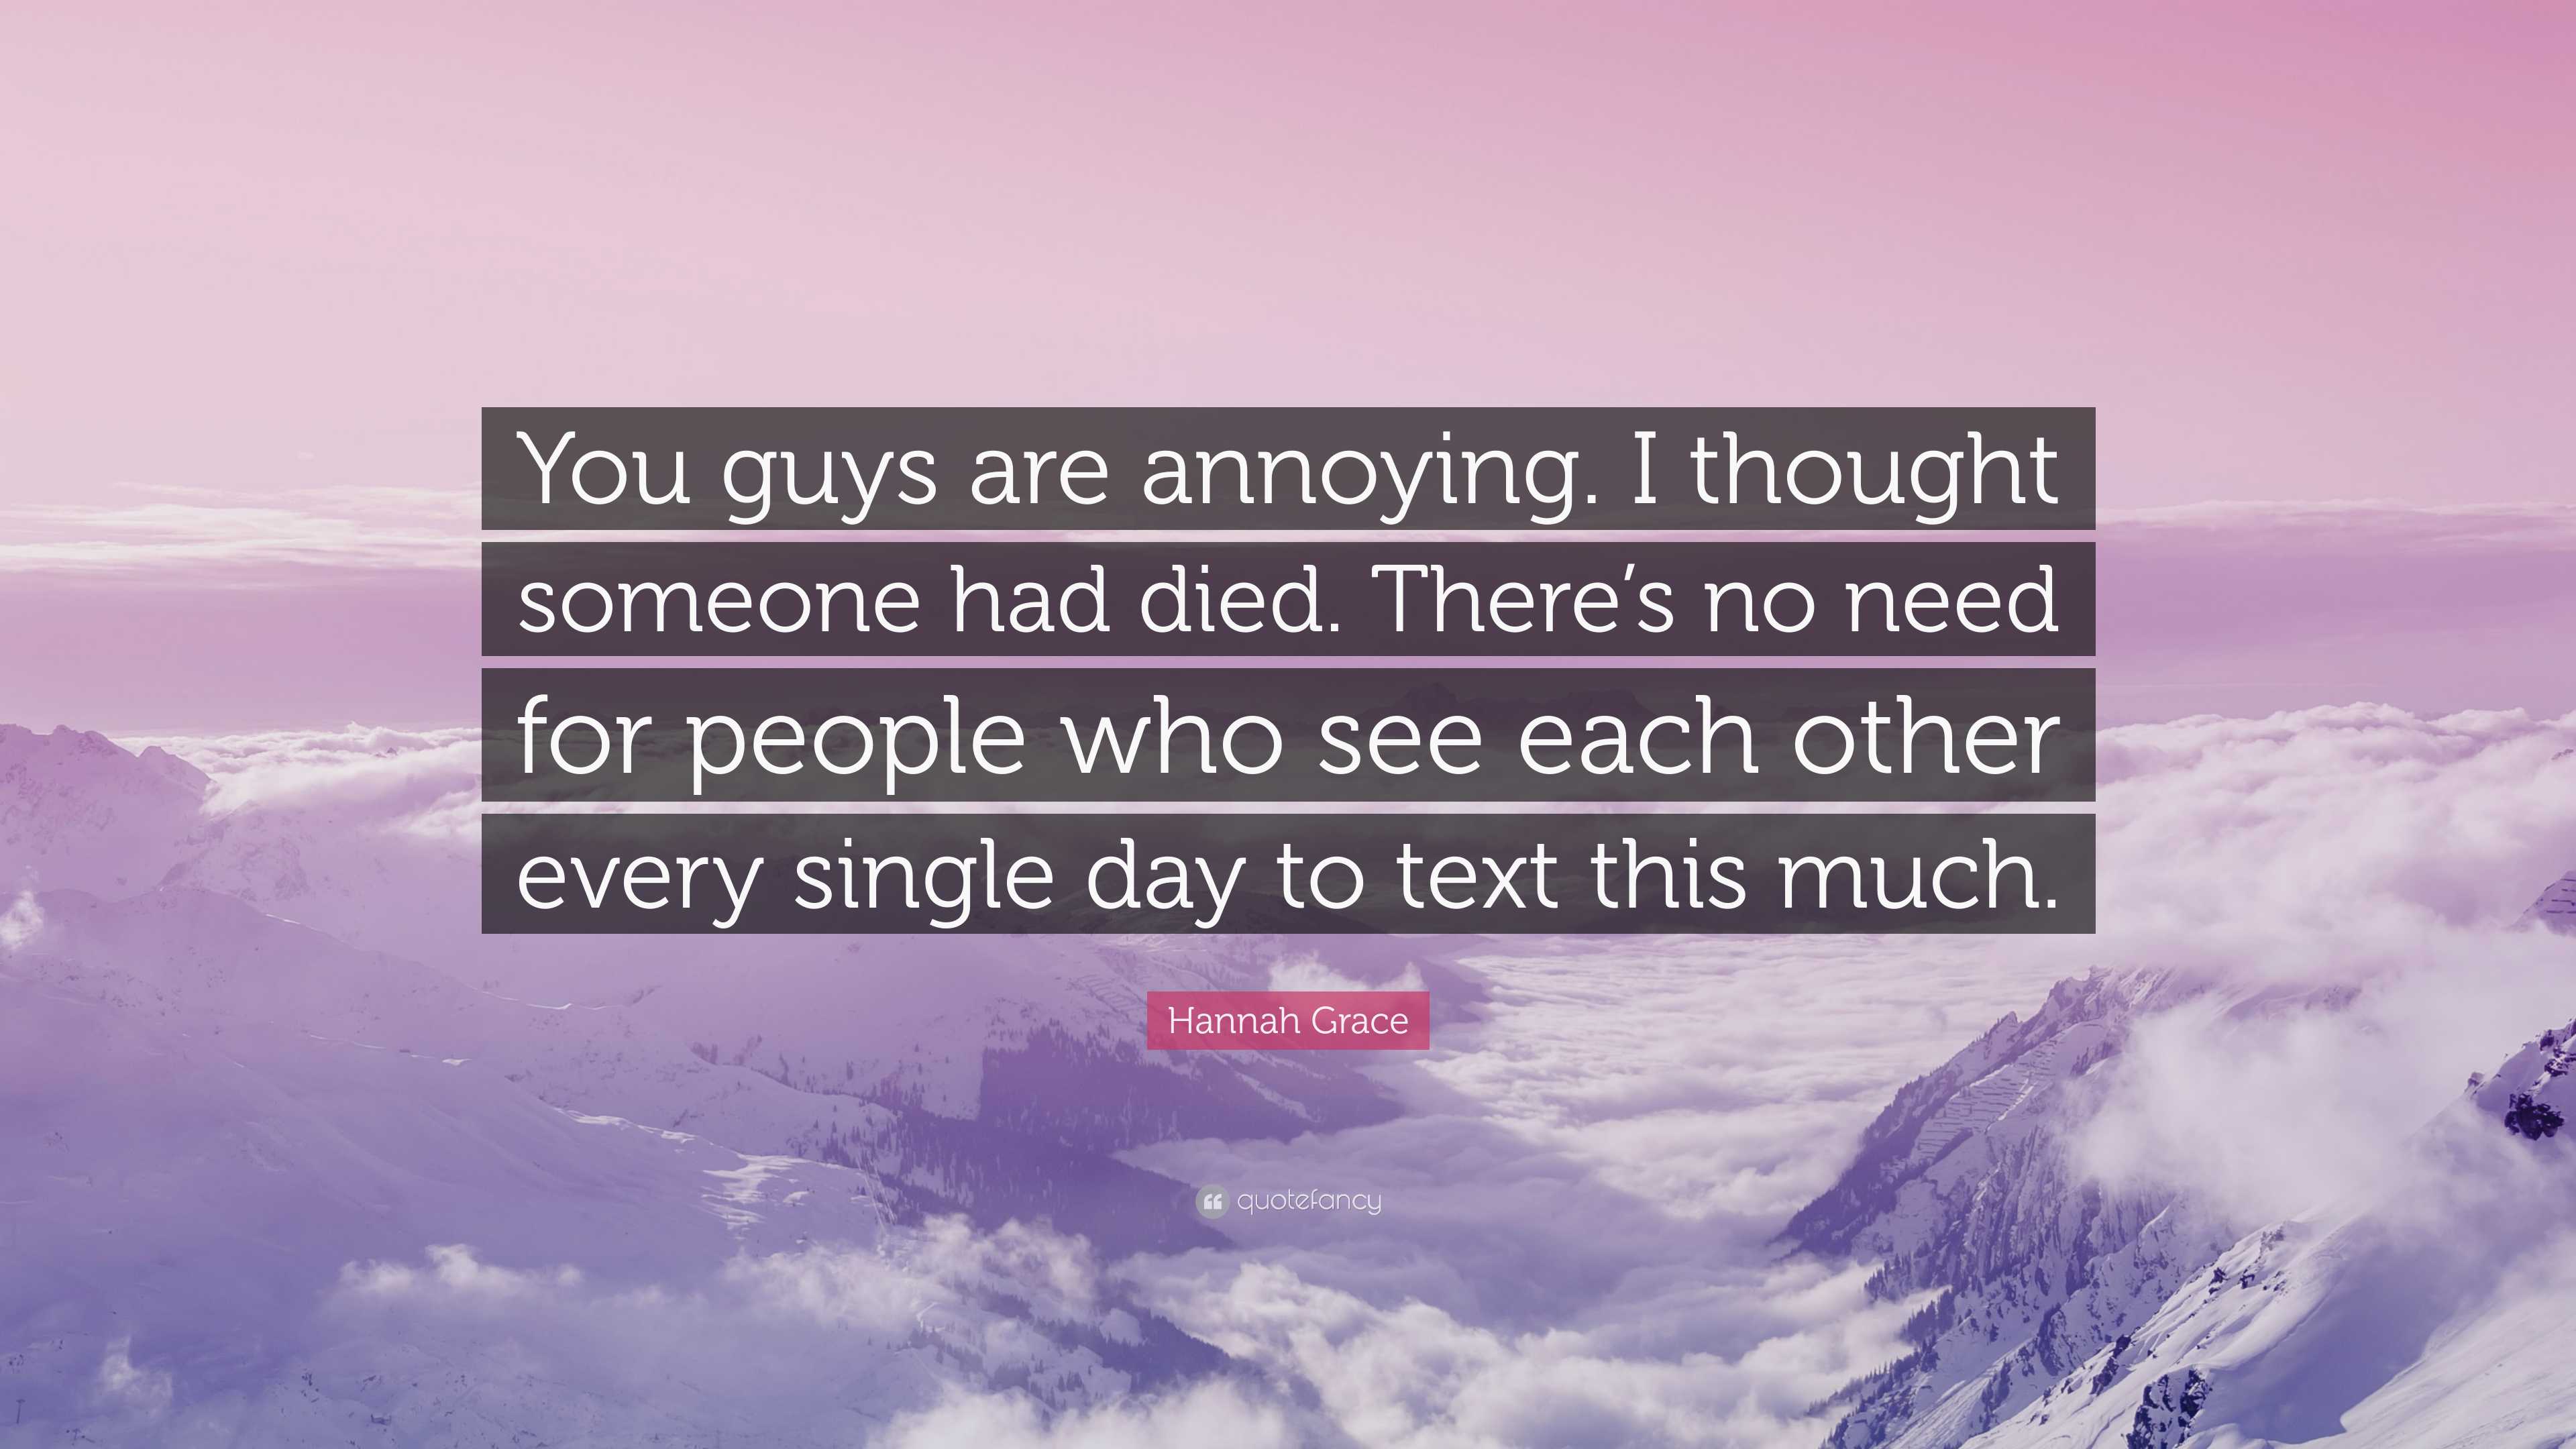 https://quotefancy.com/media/wallpaper/3840x2160/8073816-Hannah-Grace-Quote-You-guys-are-annoying-I-thought-someone-had-died-There-s-no-need.jpg